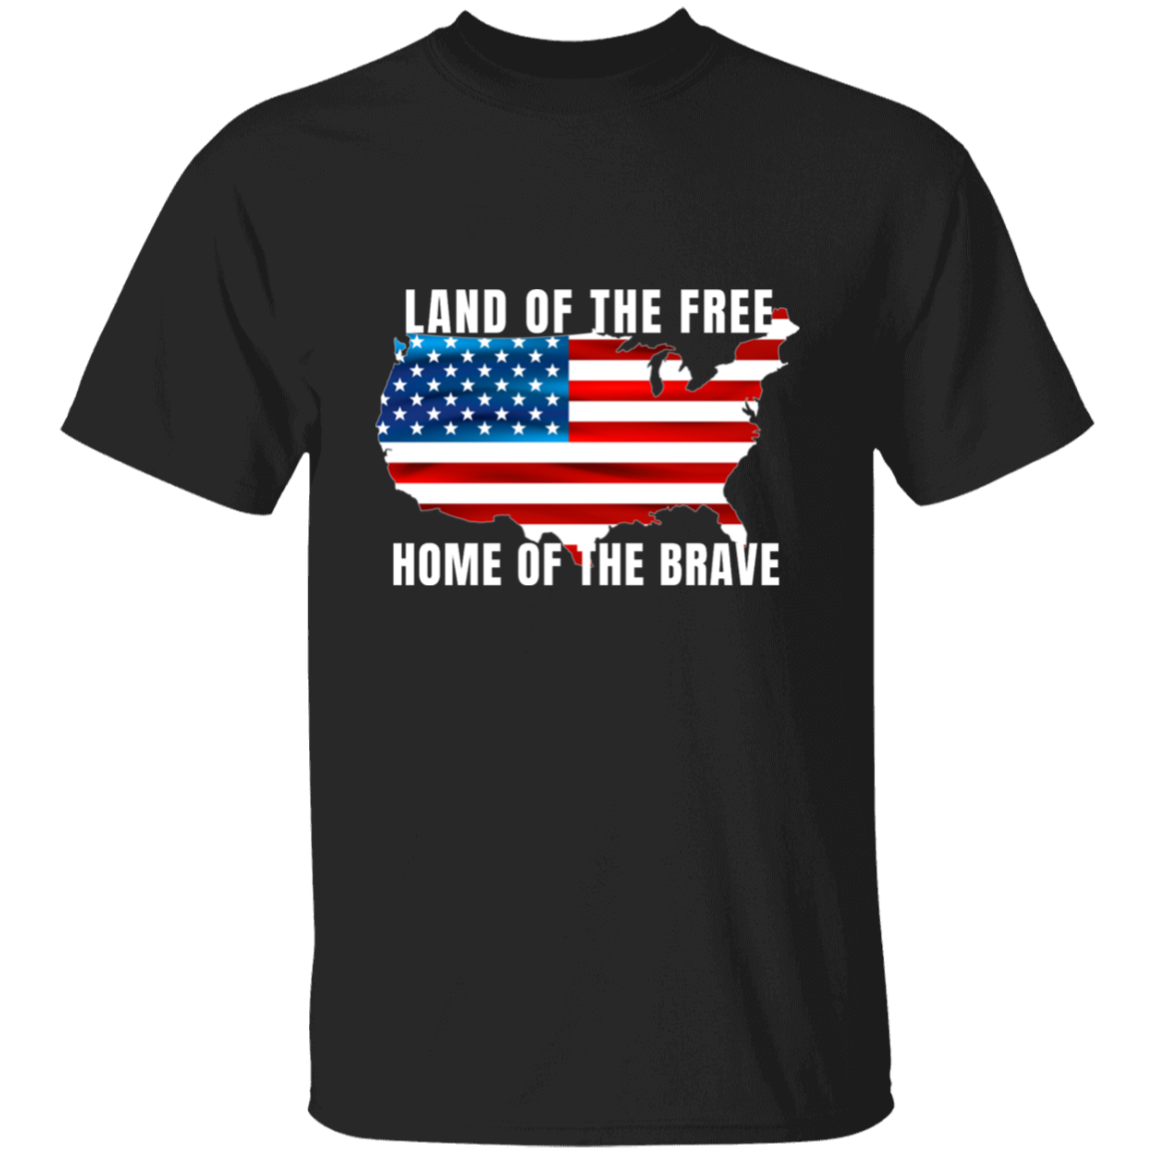 Land of the free | T-Shirt